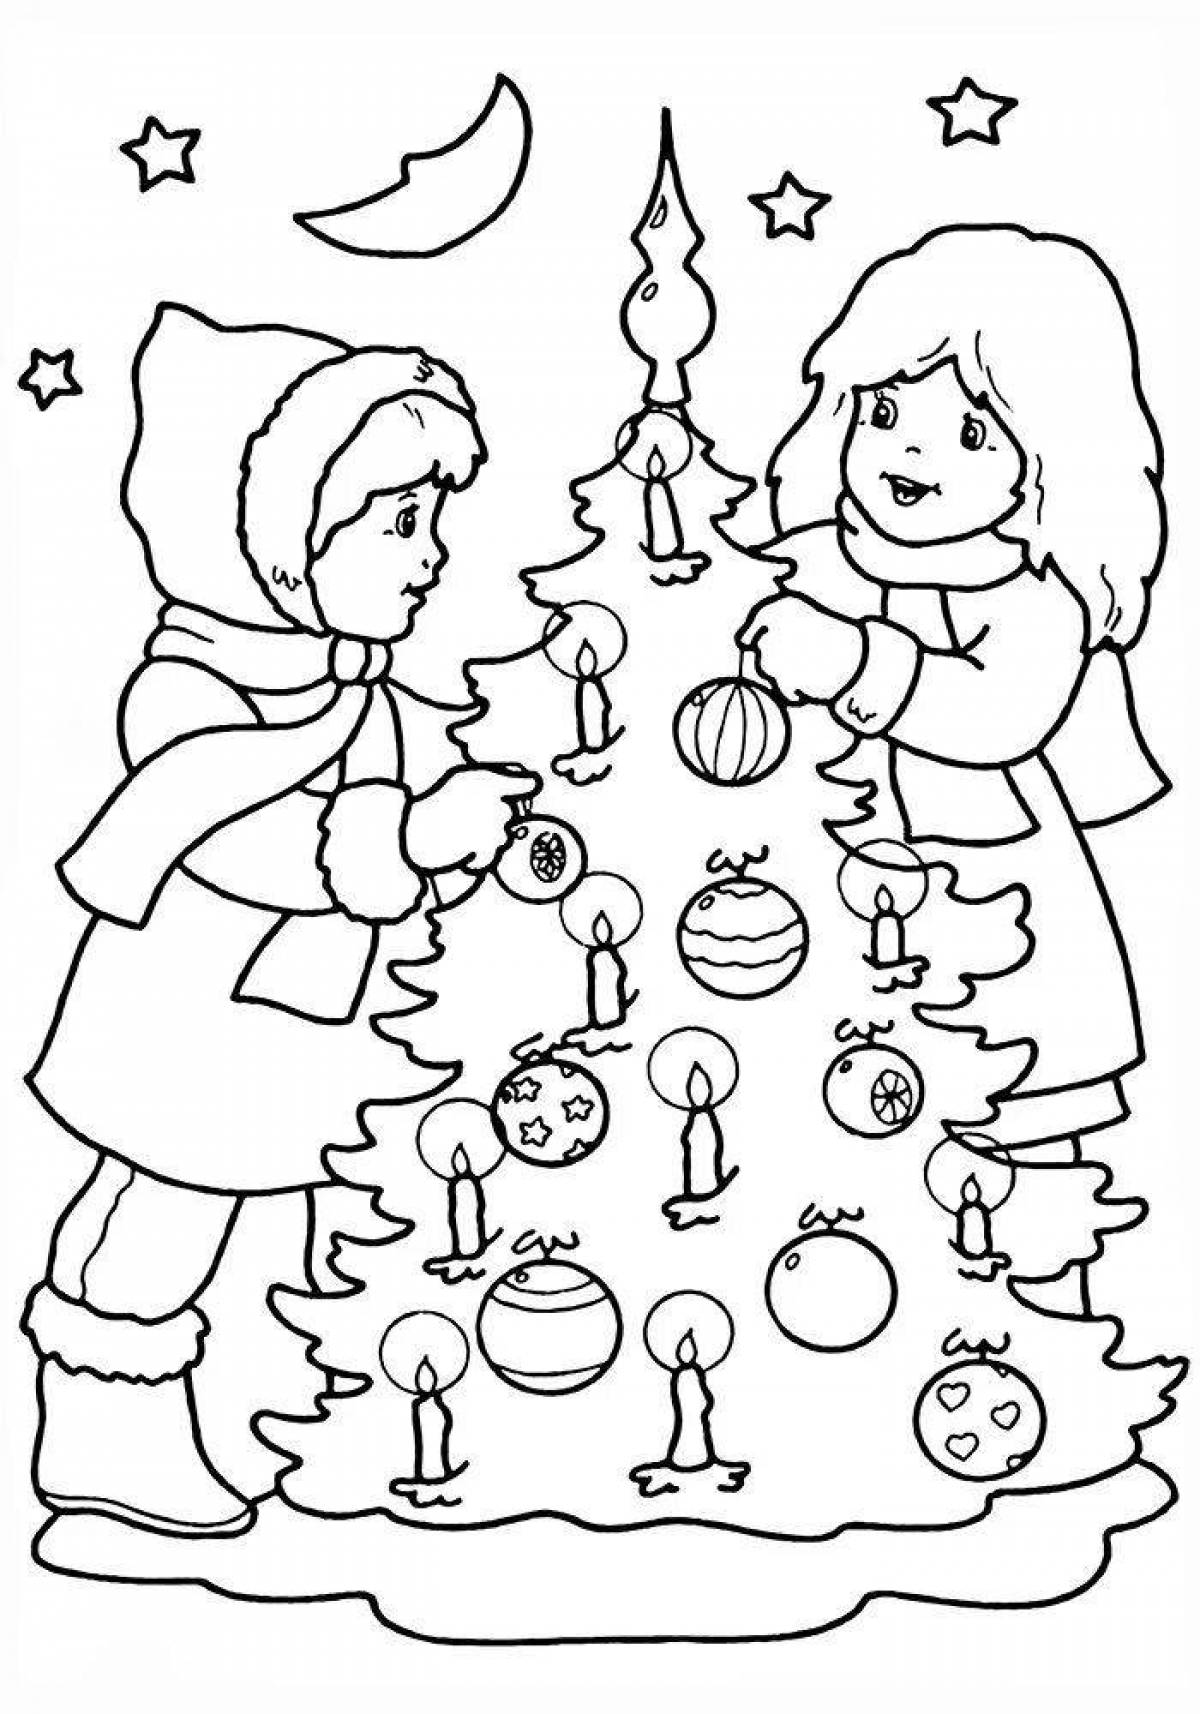 Enthusiastic Christmas coloring book